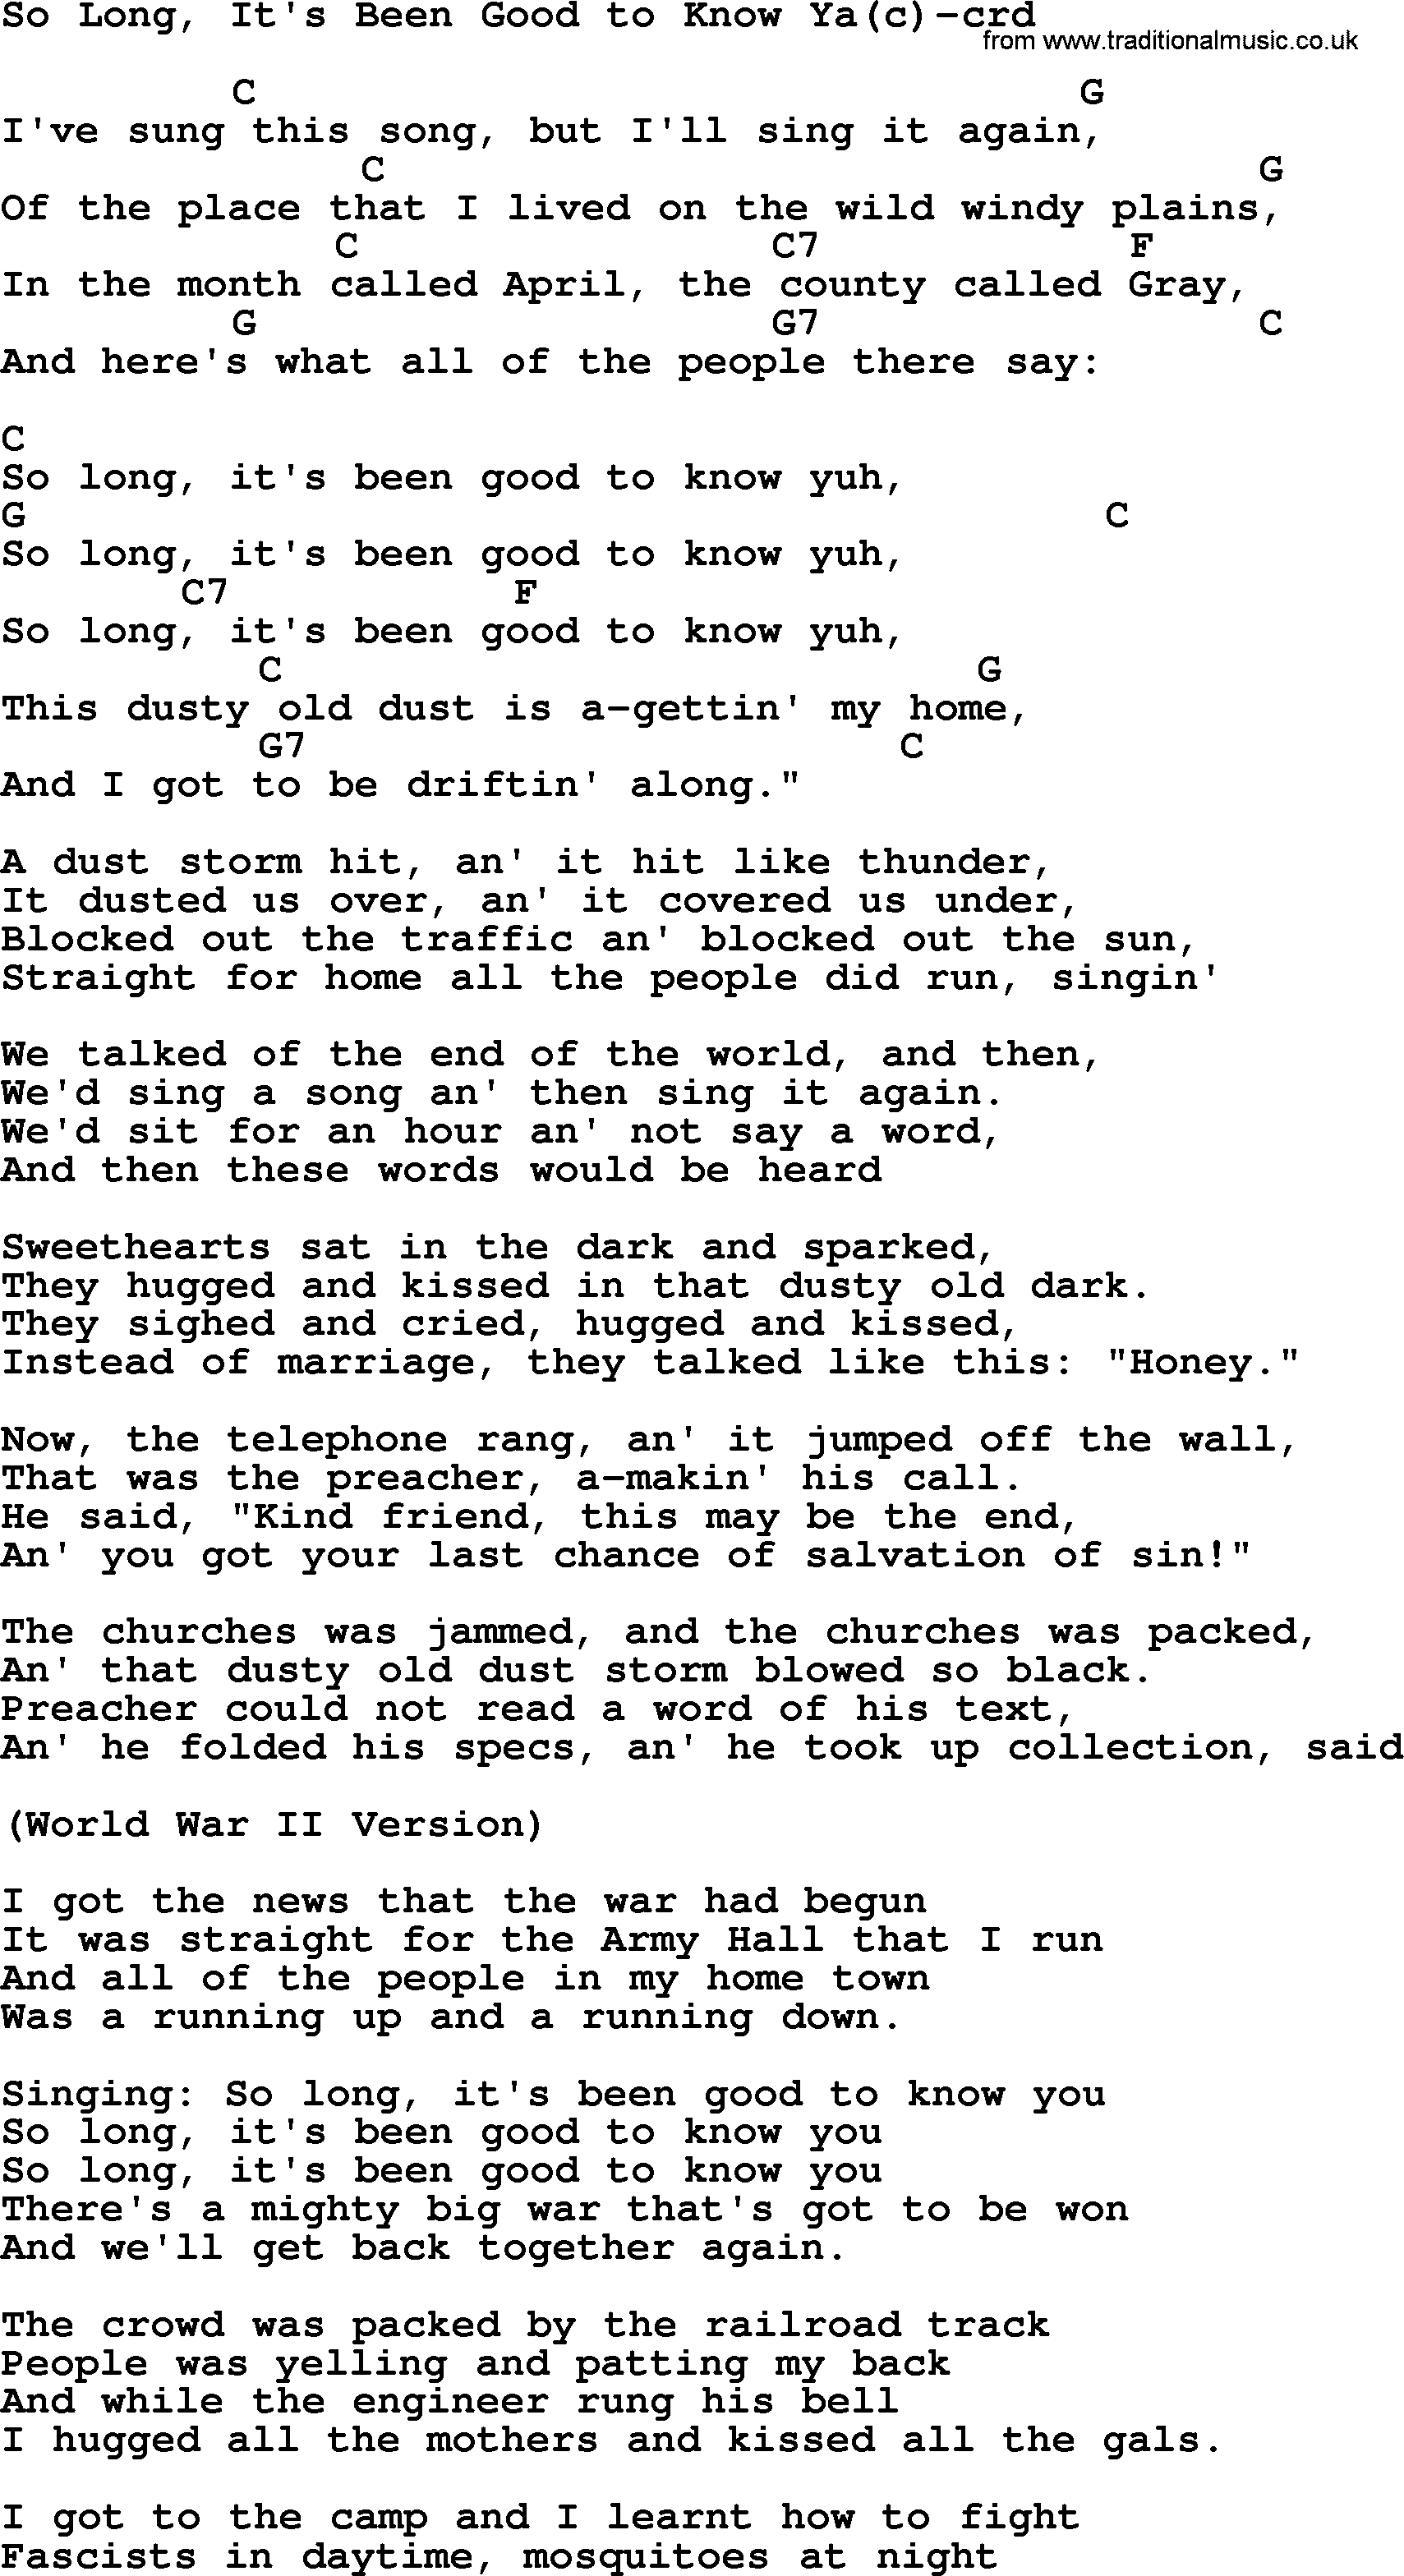 Woody Guthrie song So Long, It's Been Good To Know Ya(c) lyrics and chords